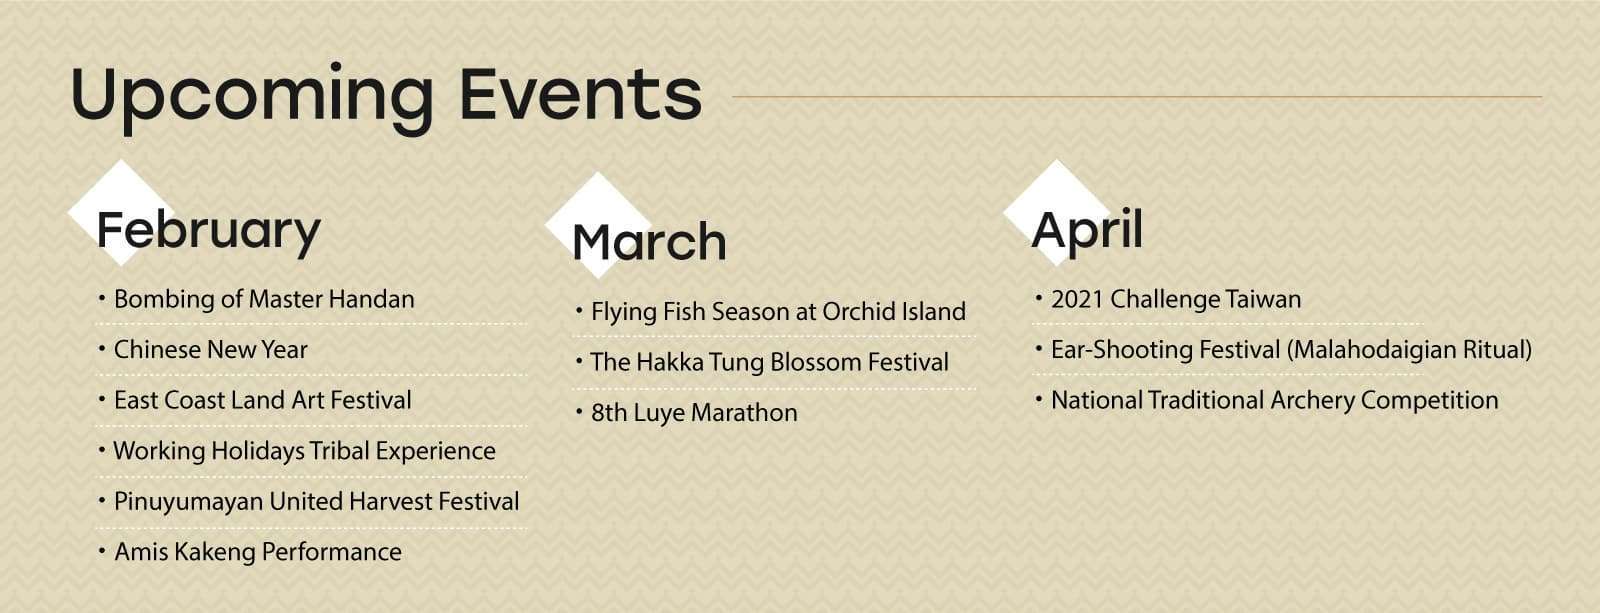 
		
Upcoming Events
・ February
・ Chinese New Year
・ Bombing of Master Handan

March
・ Flying Fish Season at Orchid Island
・ The Hakka Tung Blossom Festival
・ 8th Annual Luye Marathon
April
・ 2021 Challenge Taiwan
・ Ear-Shooting Festival (Malahodaigian Ritual)
・ National Traditional Archery Competition

